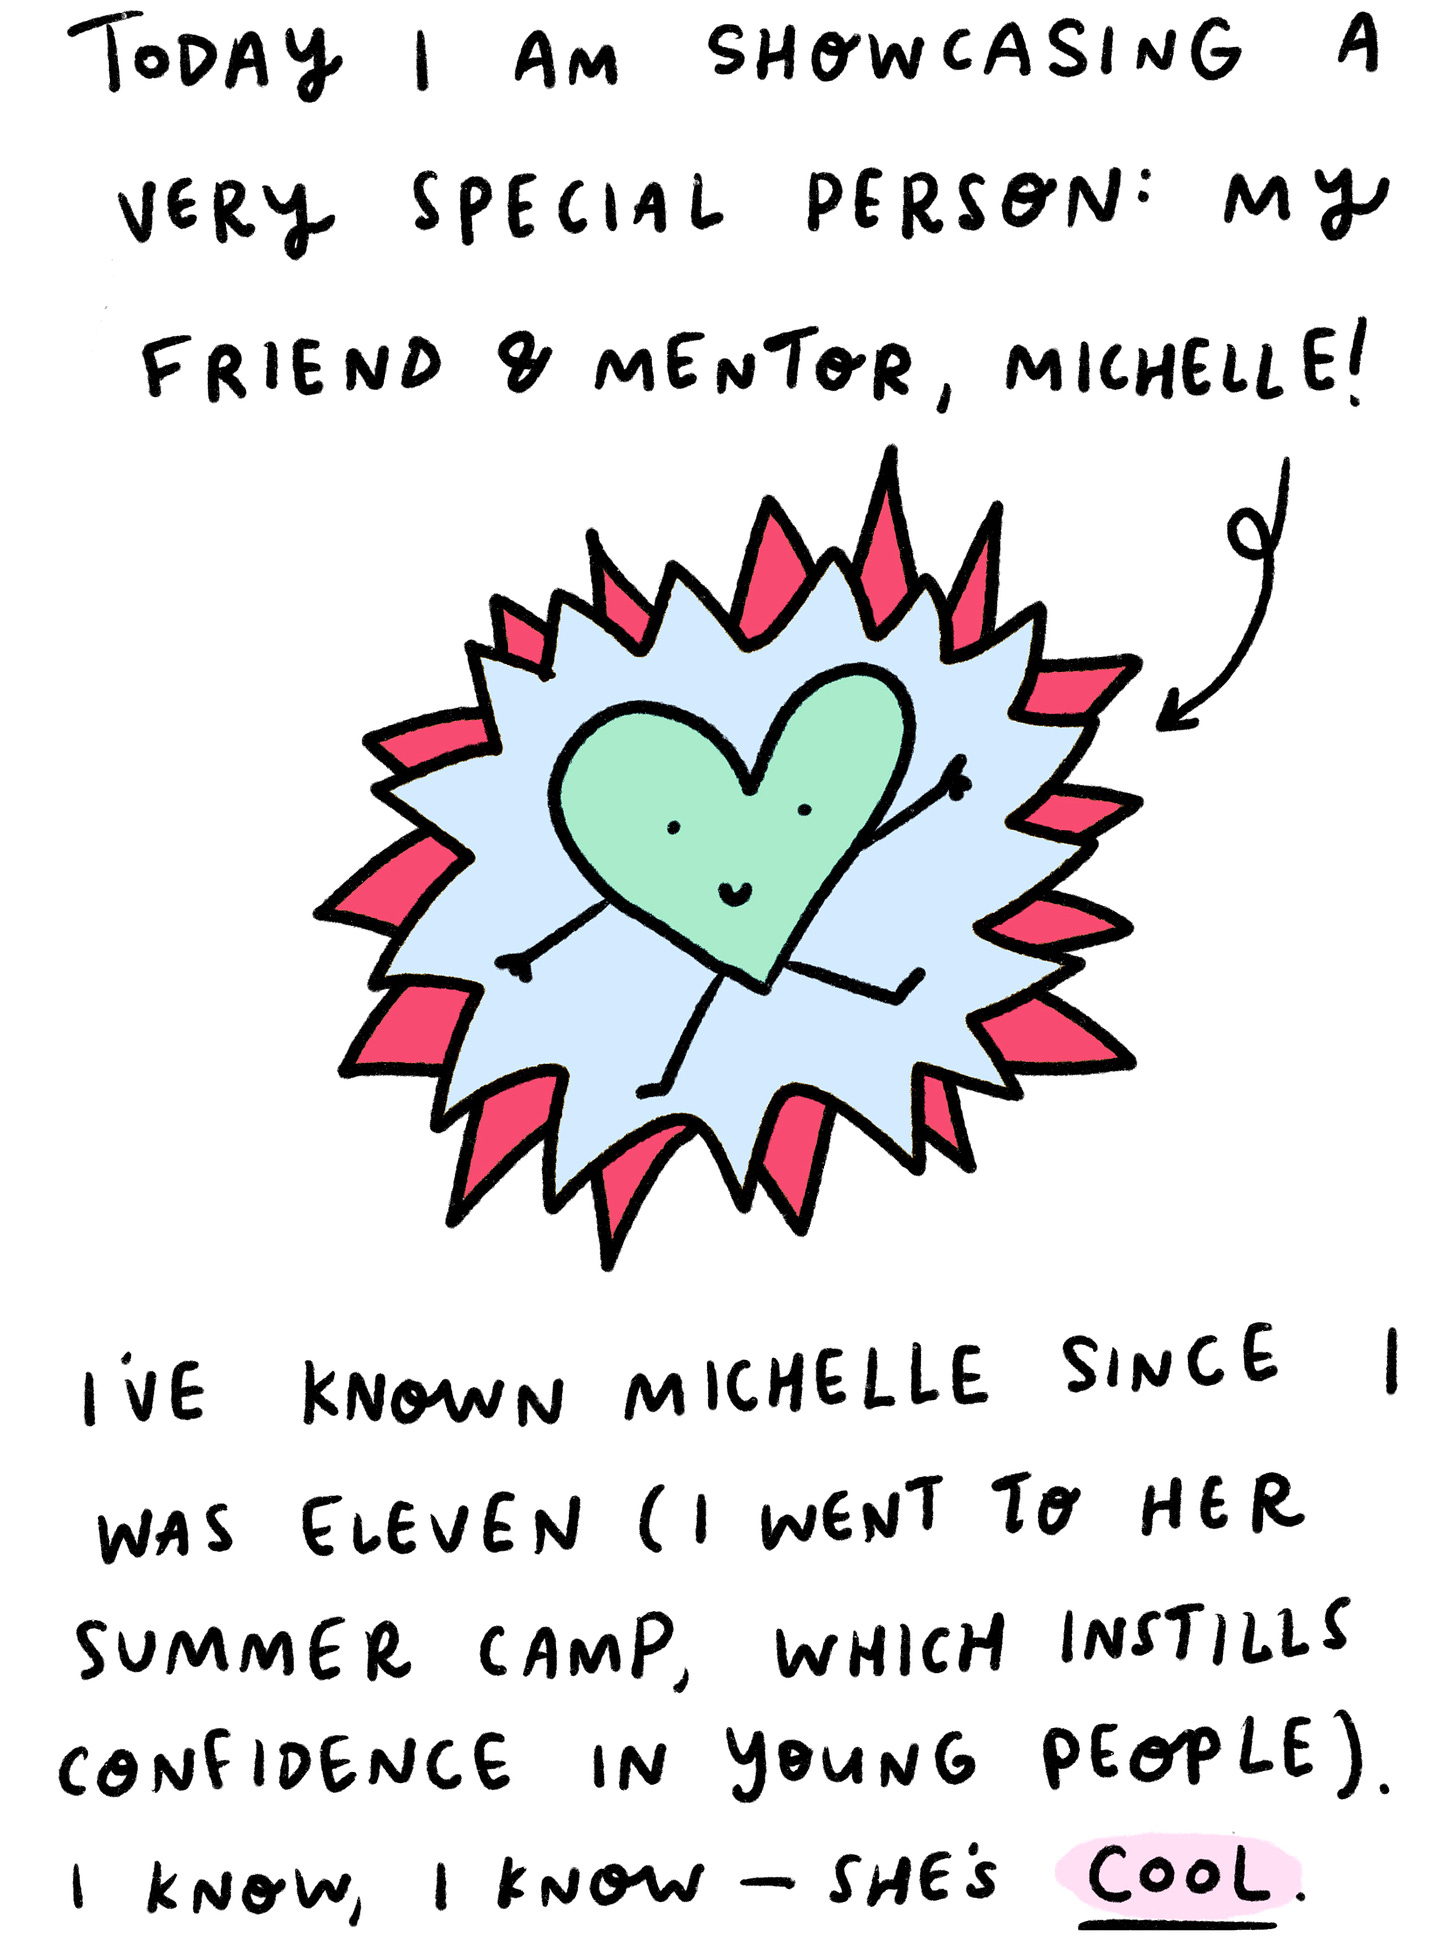 Reads "Today I am showcasing a very special person: my friend and mentor michelle!"